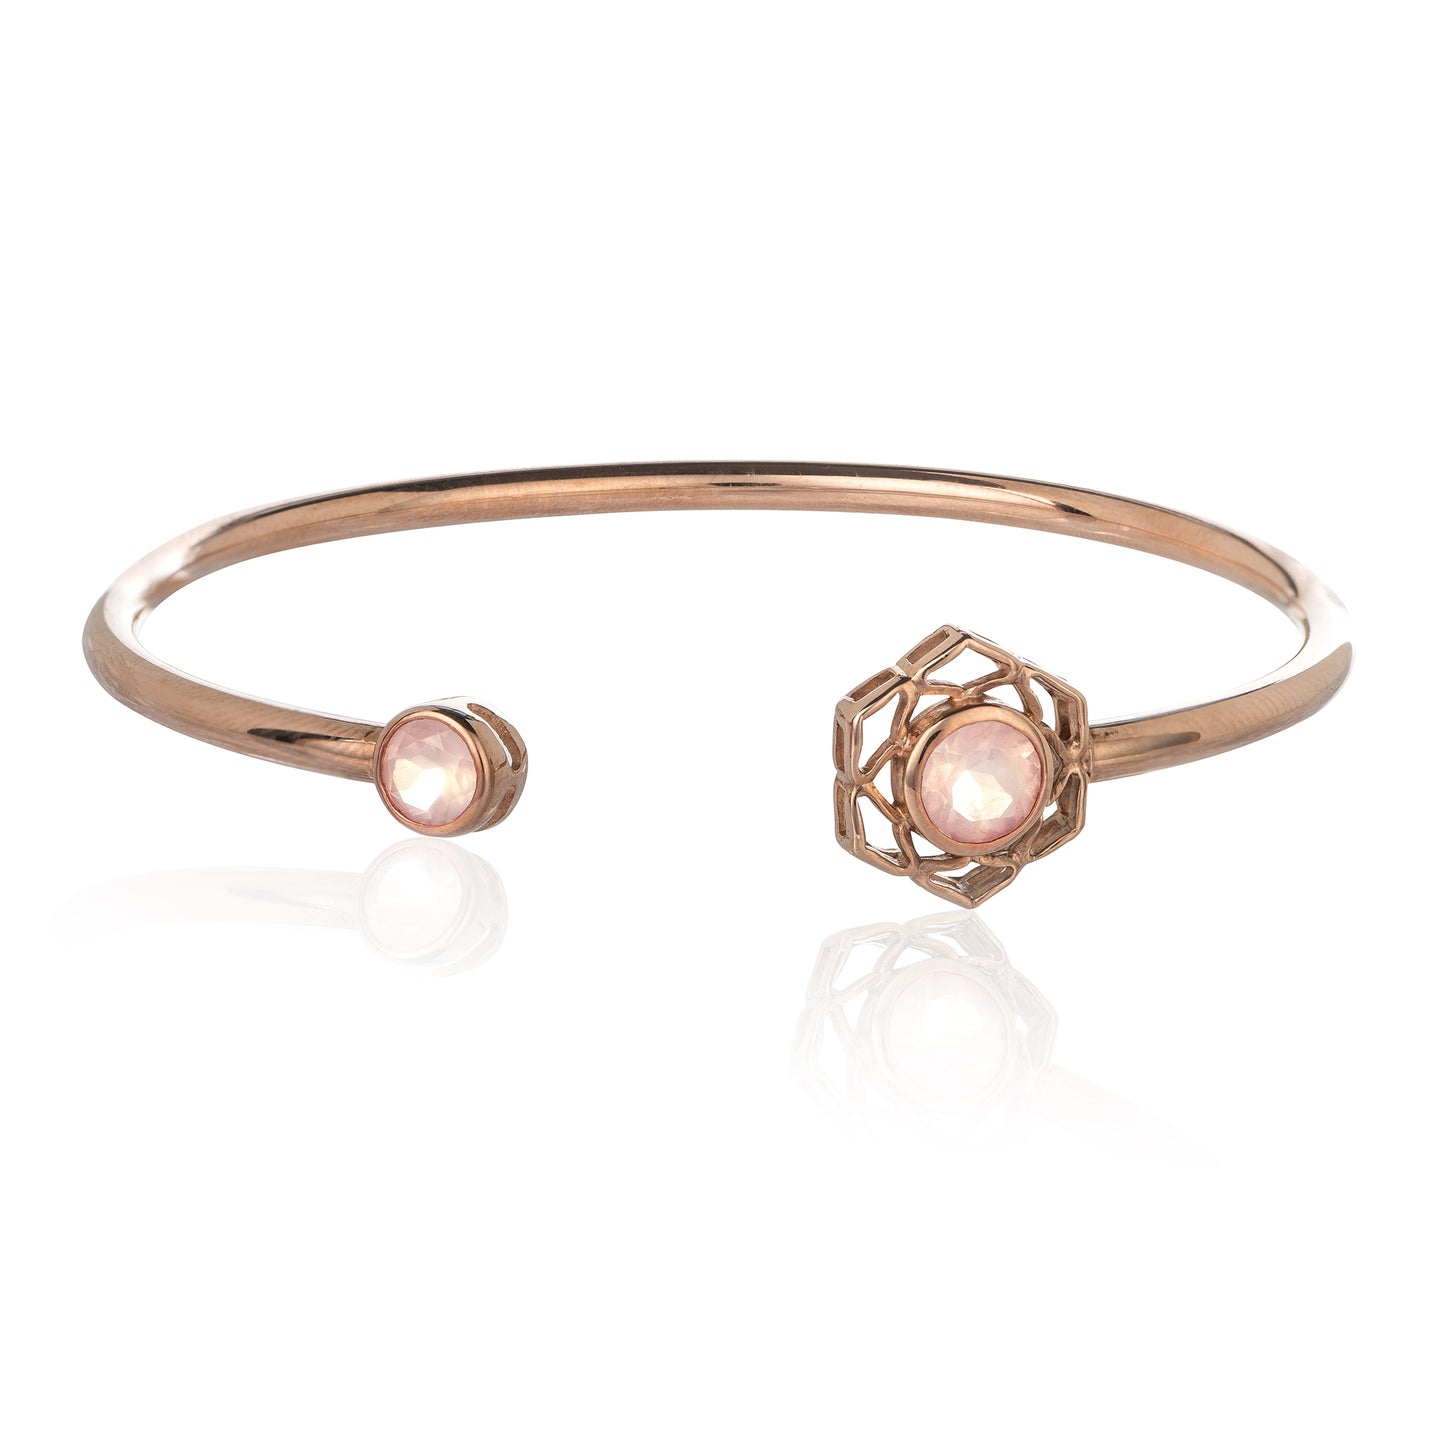 The Rose Gold Flower Of Life Cuff